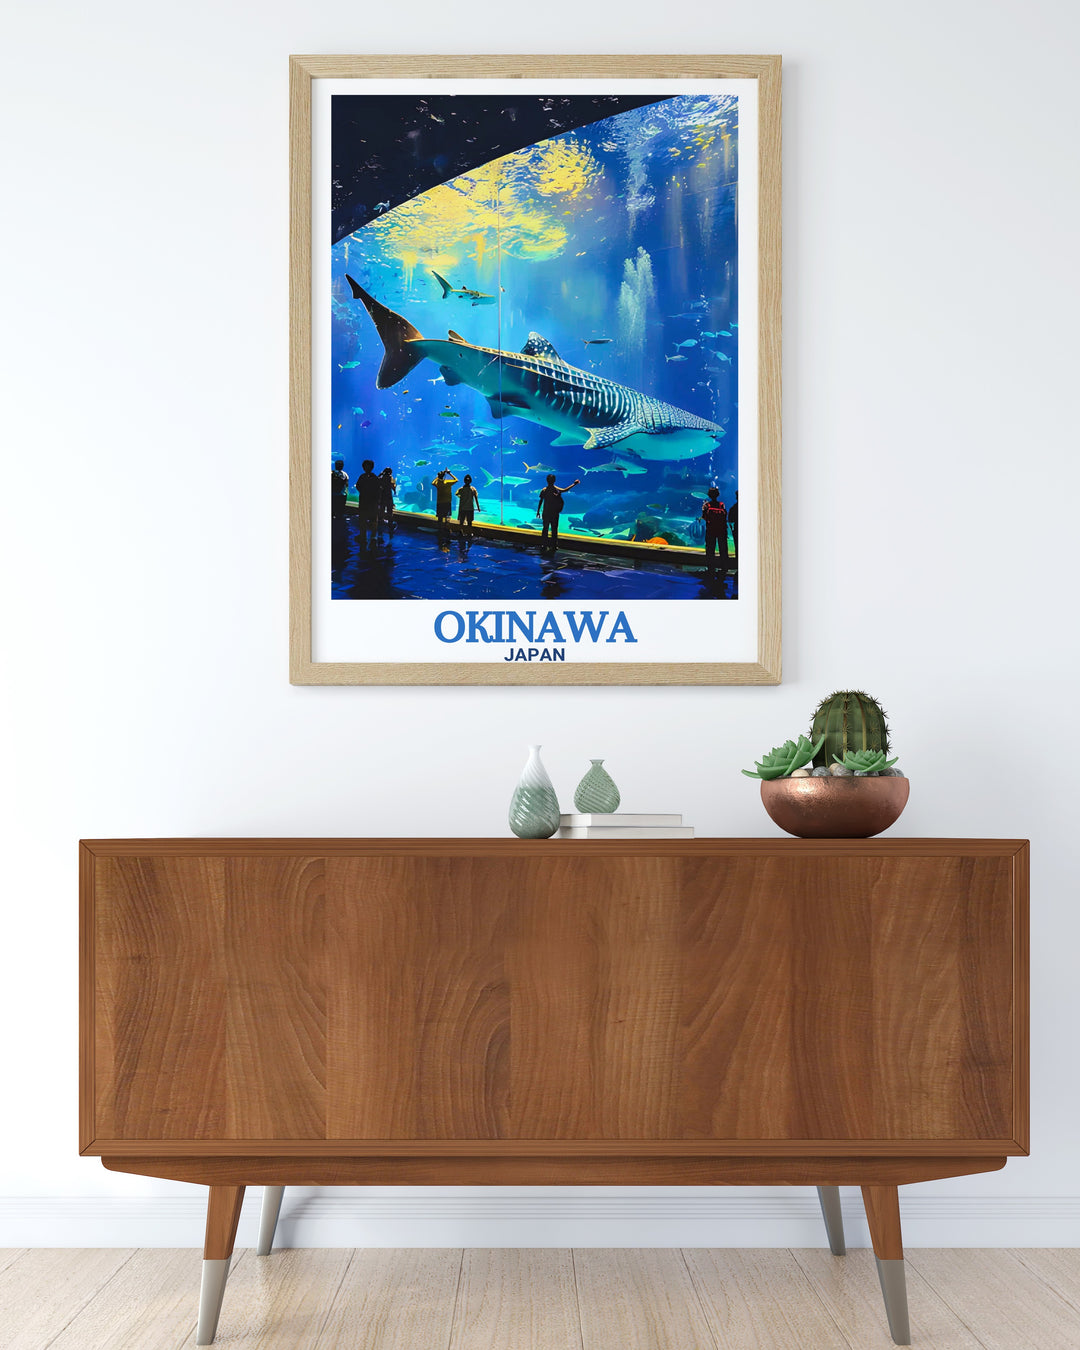 Okinawa Churaumi Aquarium vintage print capturing the unique marine biodiversity and cultural heritage of Okinawa perfect for enhancing any room with beautiful and meaningful wall art